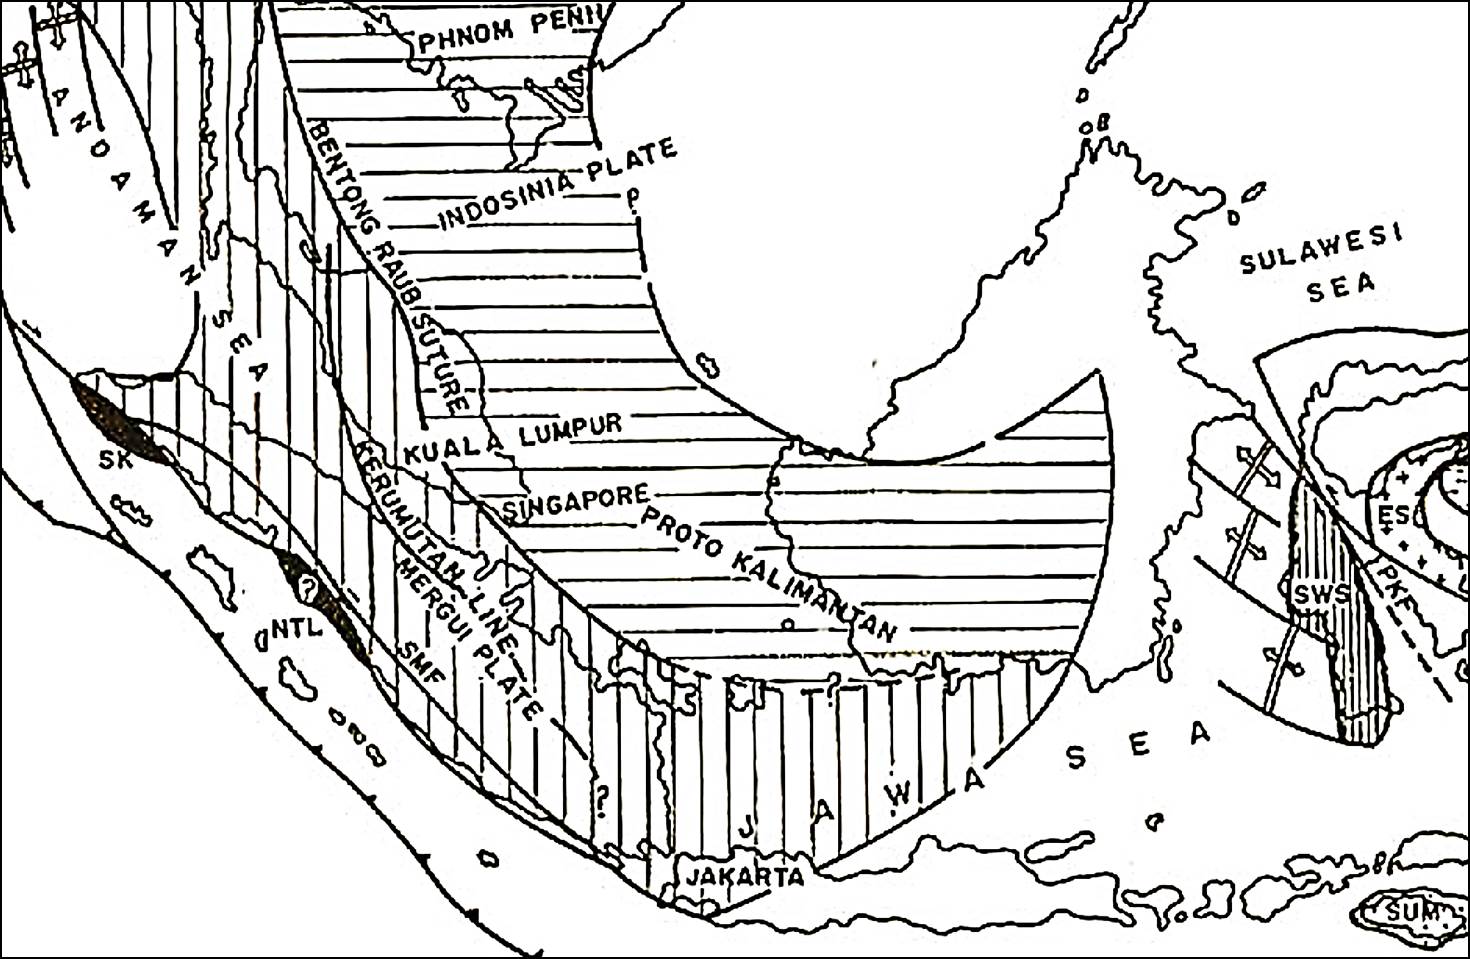 Geologic setting of Borneo island (Hartono and Tjokrosapoetro 1986).  In this 'traditional' model, the core of Borneo is part of Triassic Sundaland, an extension of the Indochina plate, possibly also Sibumasu (diamond source?).